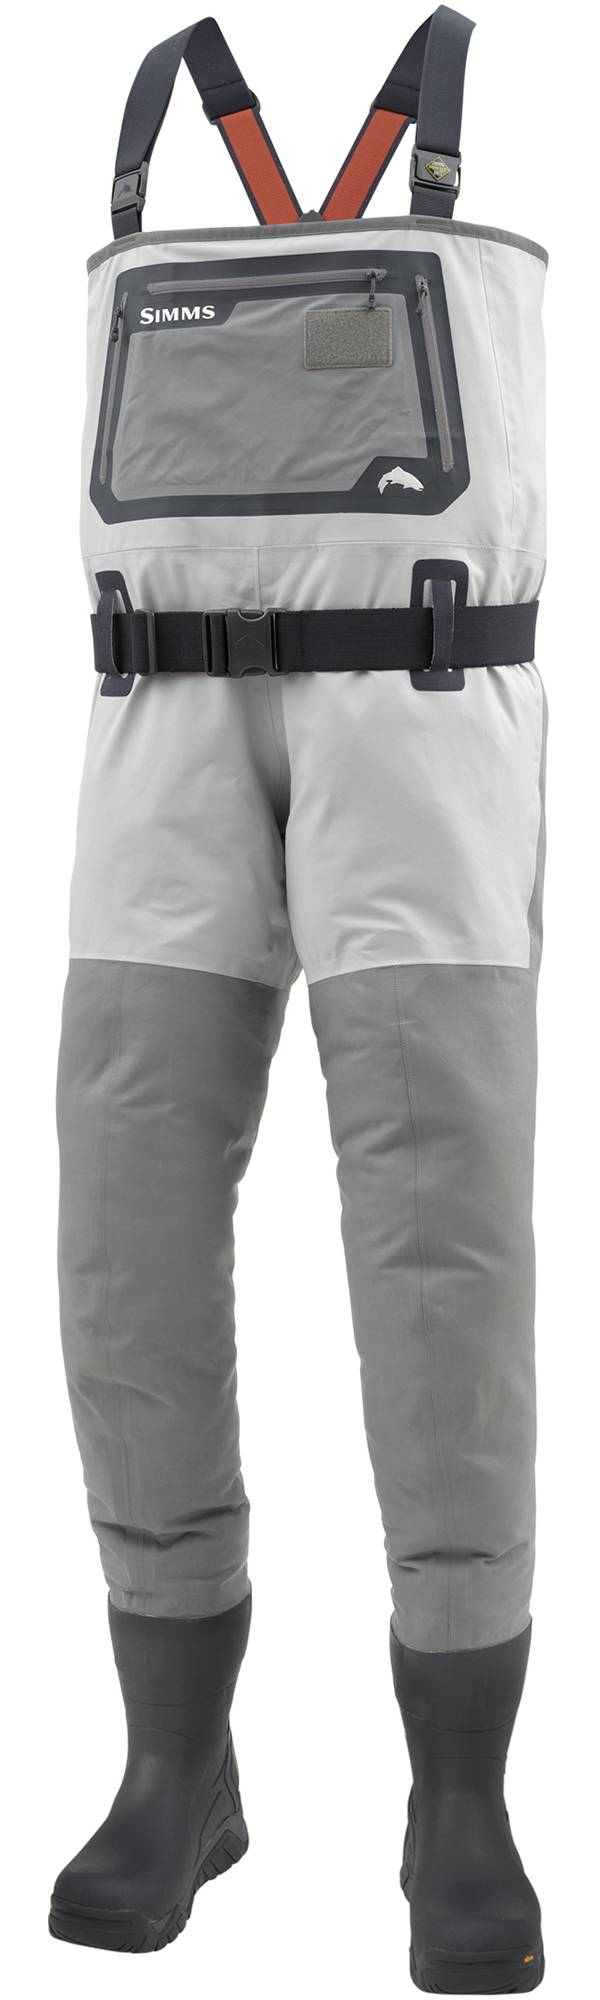 Simms G3 Guide Bootfoot Chest Waders – Vibram Sole product image